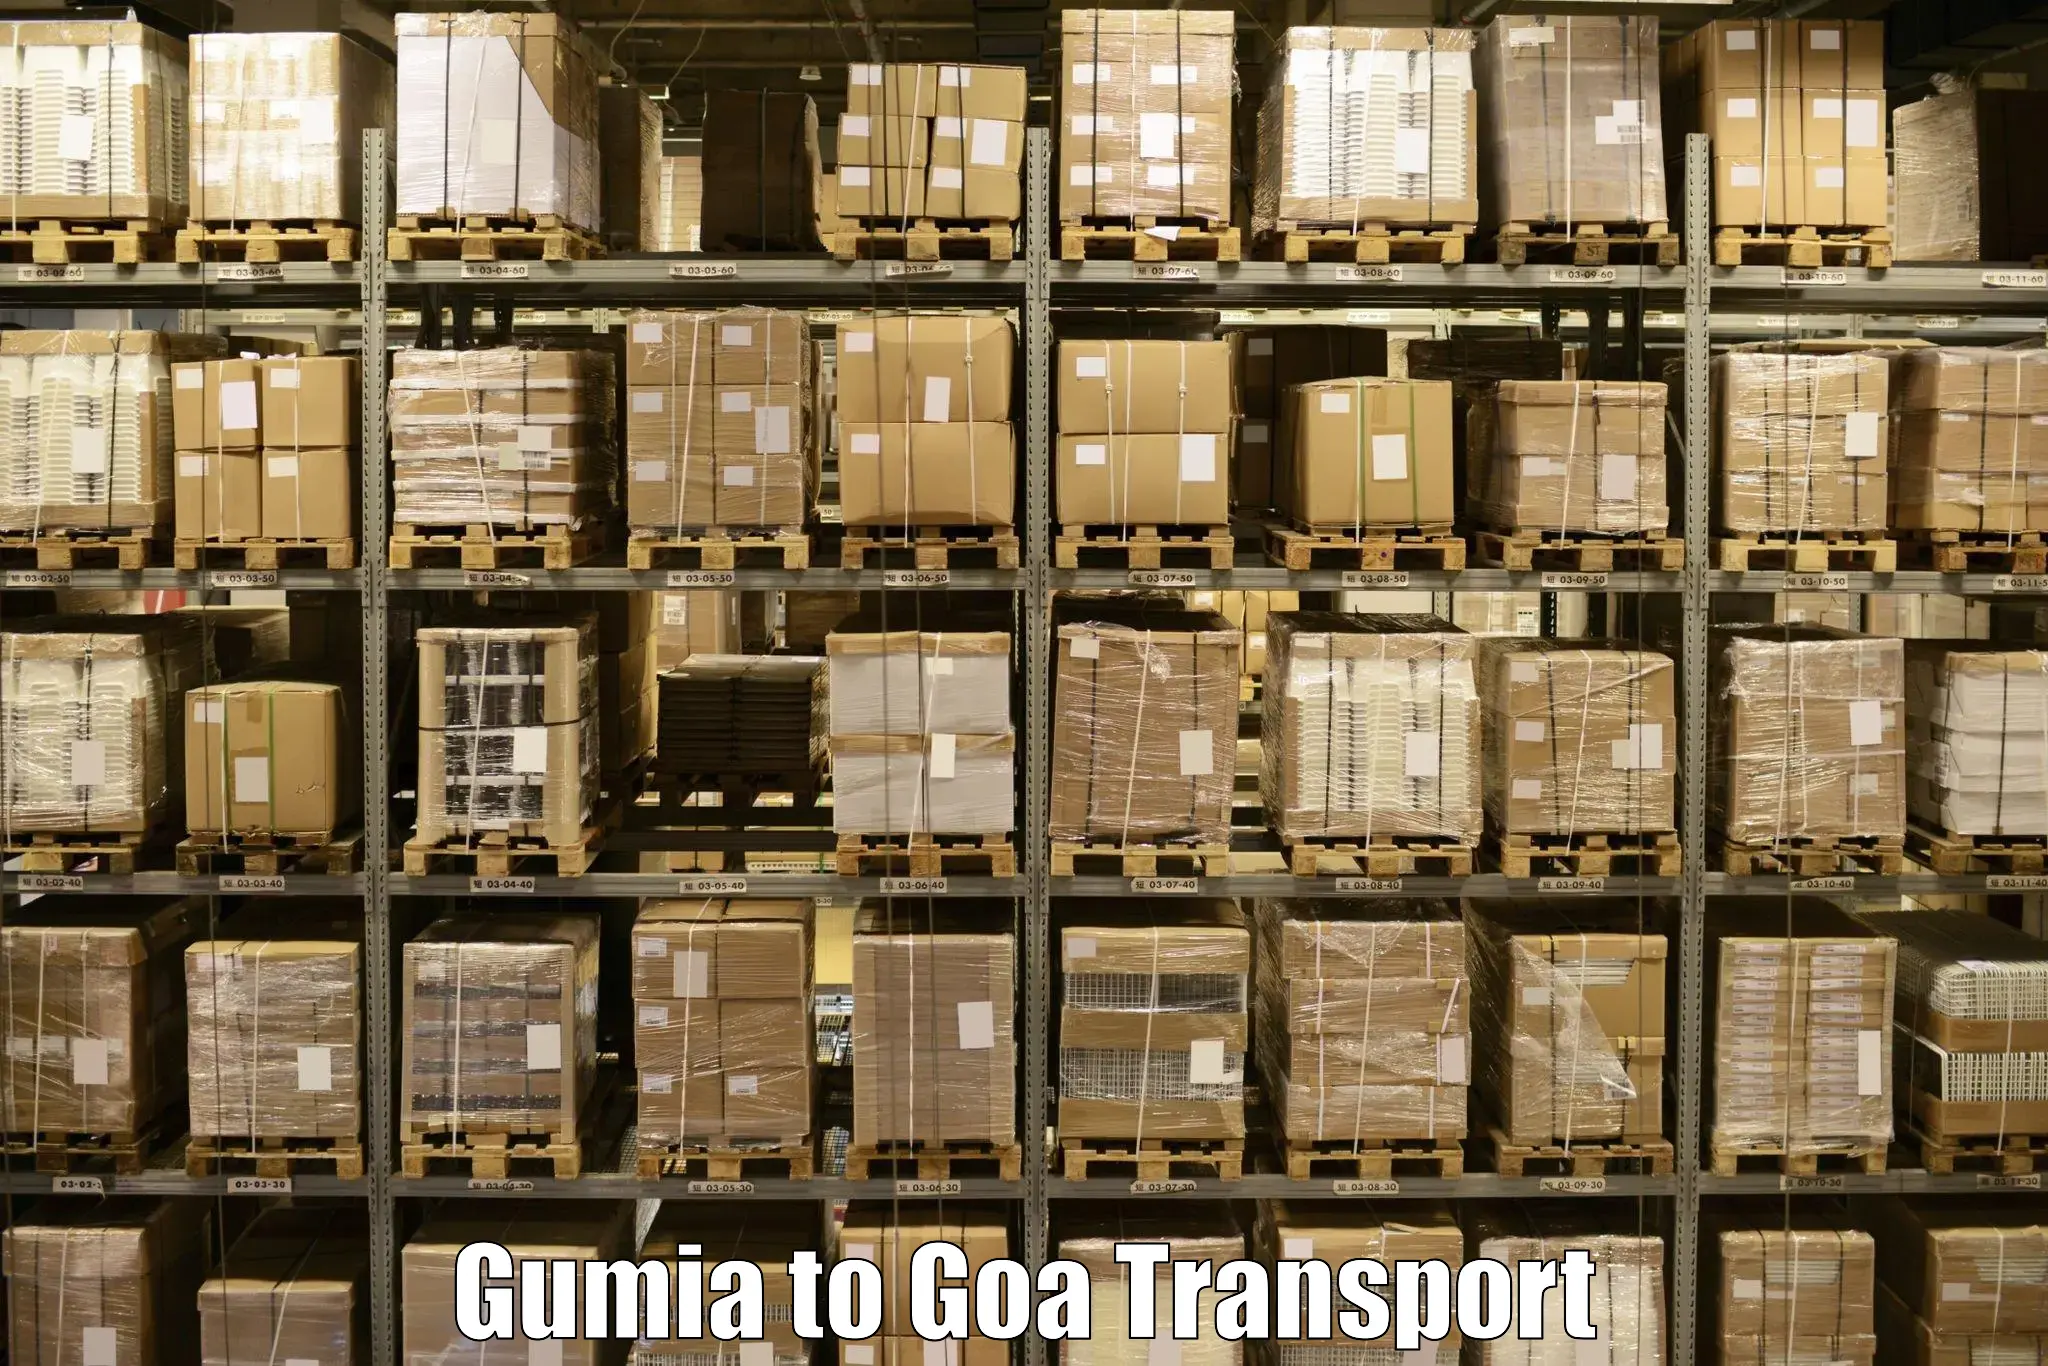 Transport shared services Gumia to Goa